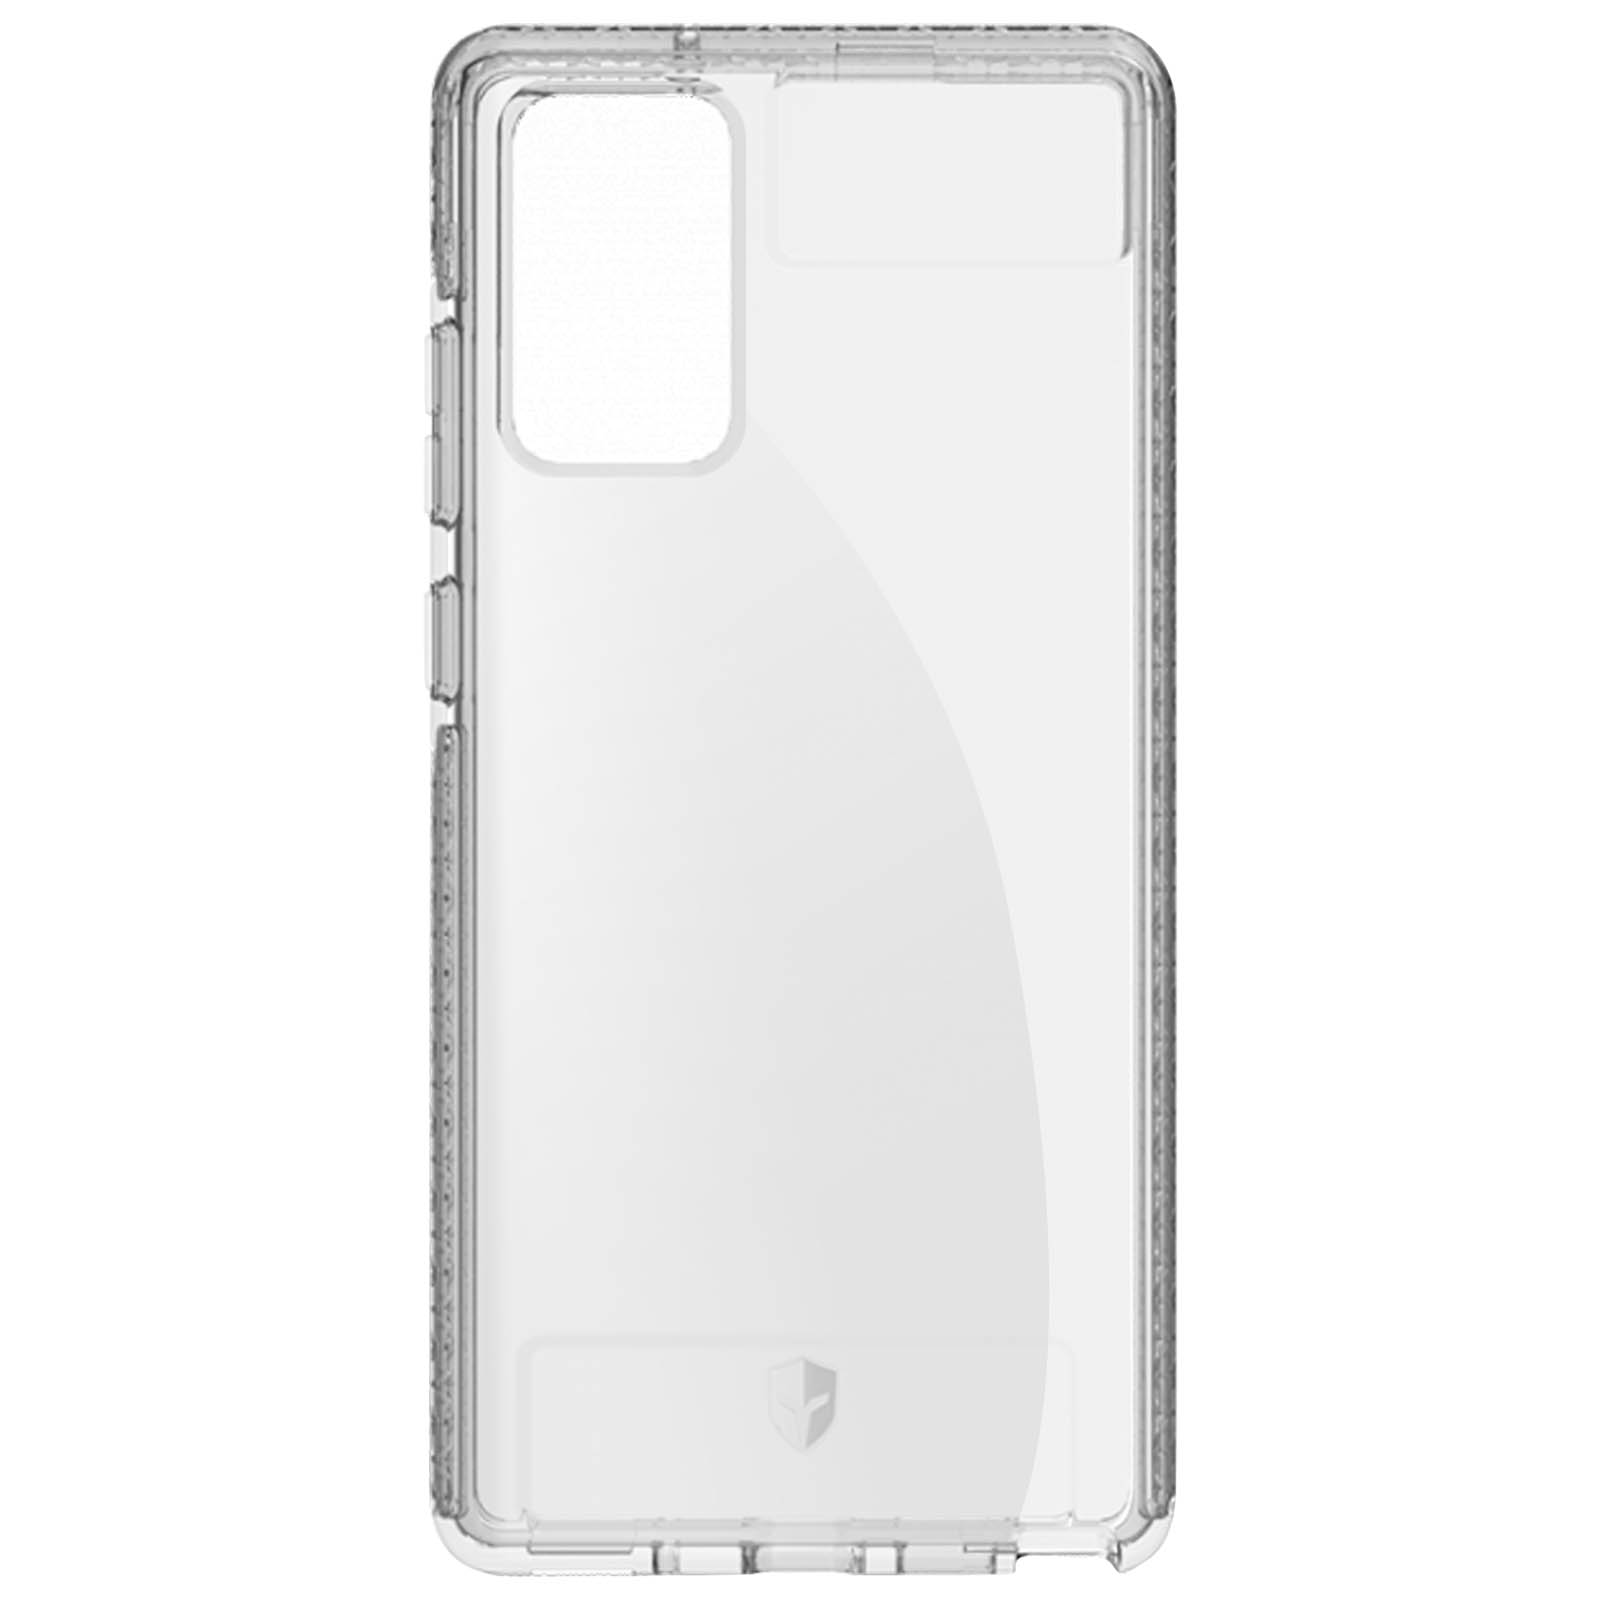 Life CASE 20, Samsung, Galaxy Backcover, Series, Transparent Note Tryax-System mit FORCE